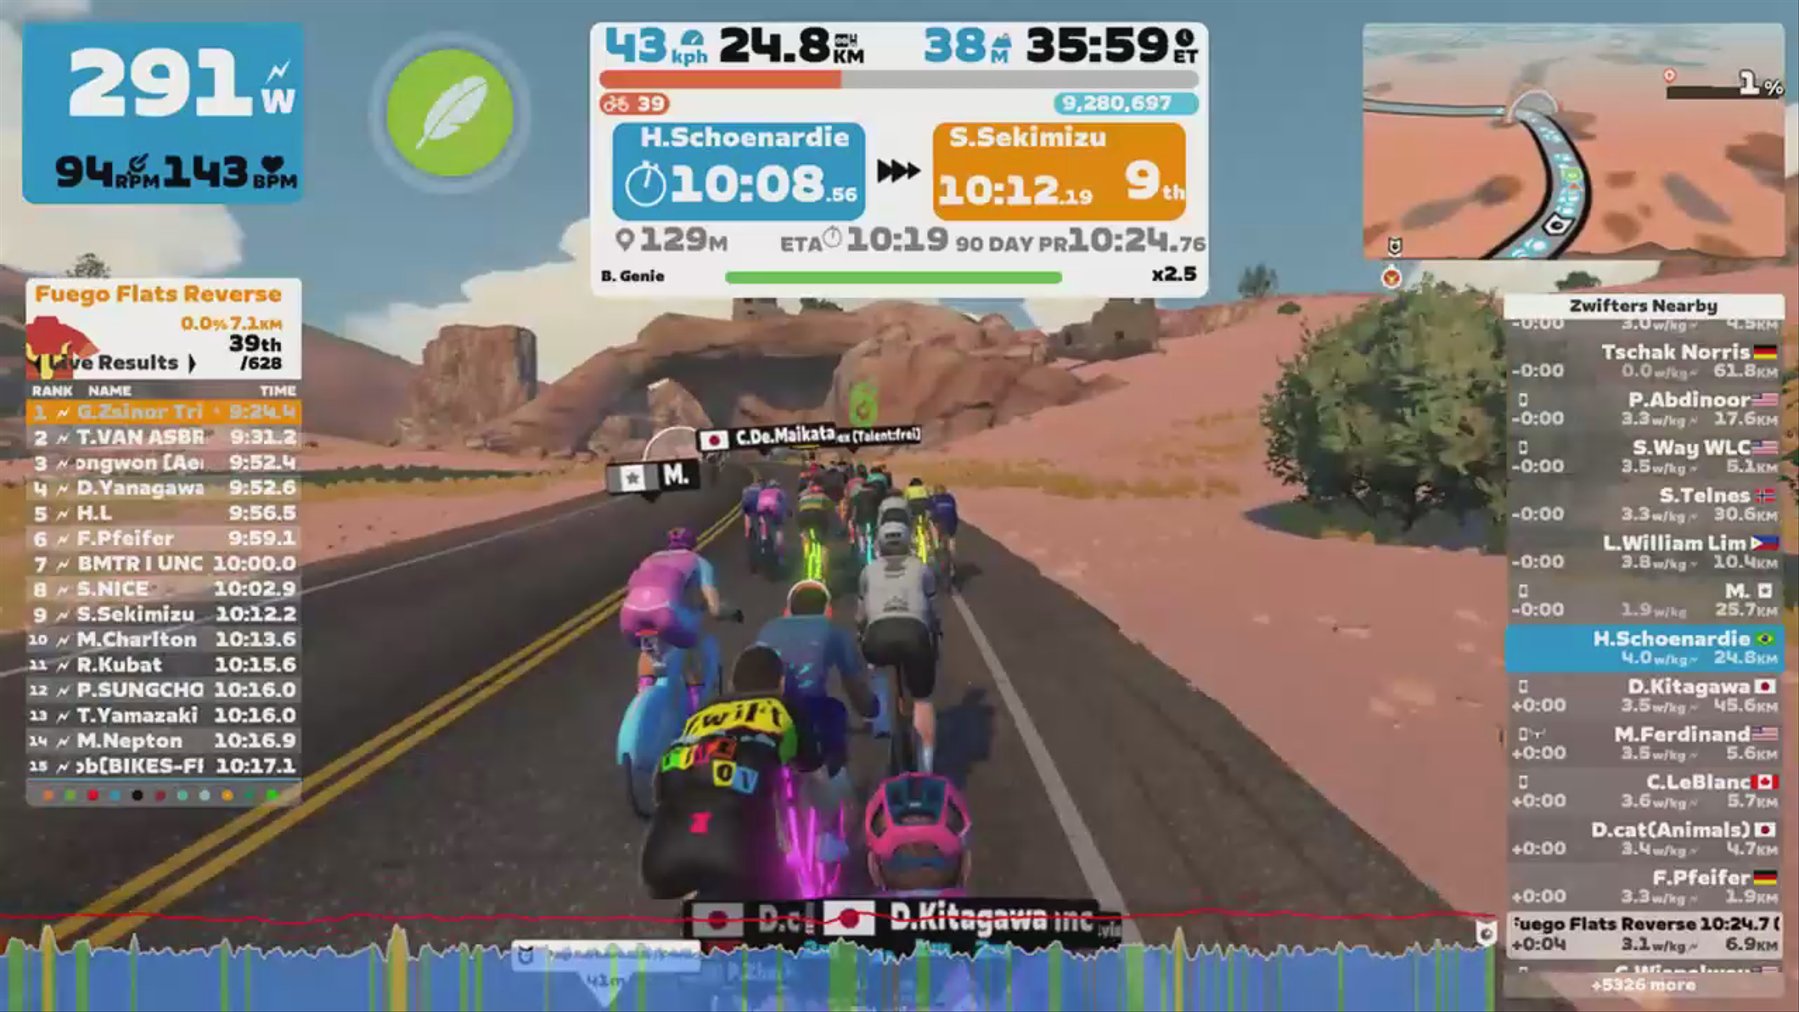 Zwift - Pacer Group Ride: Tempus Fugit in Watopia with Genie